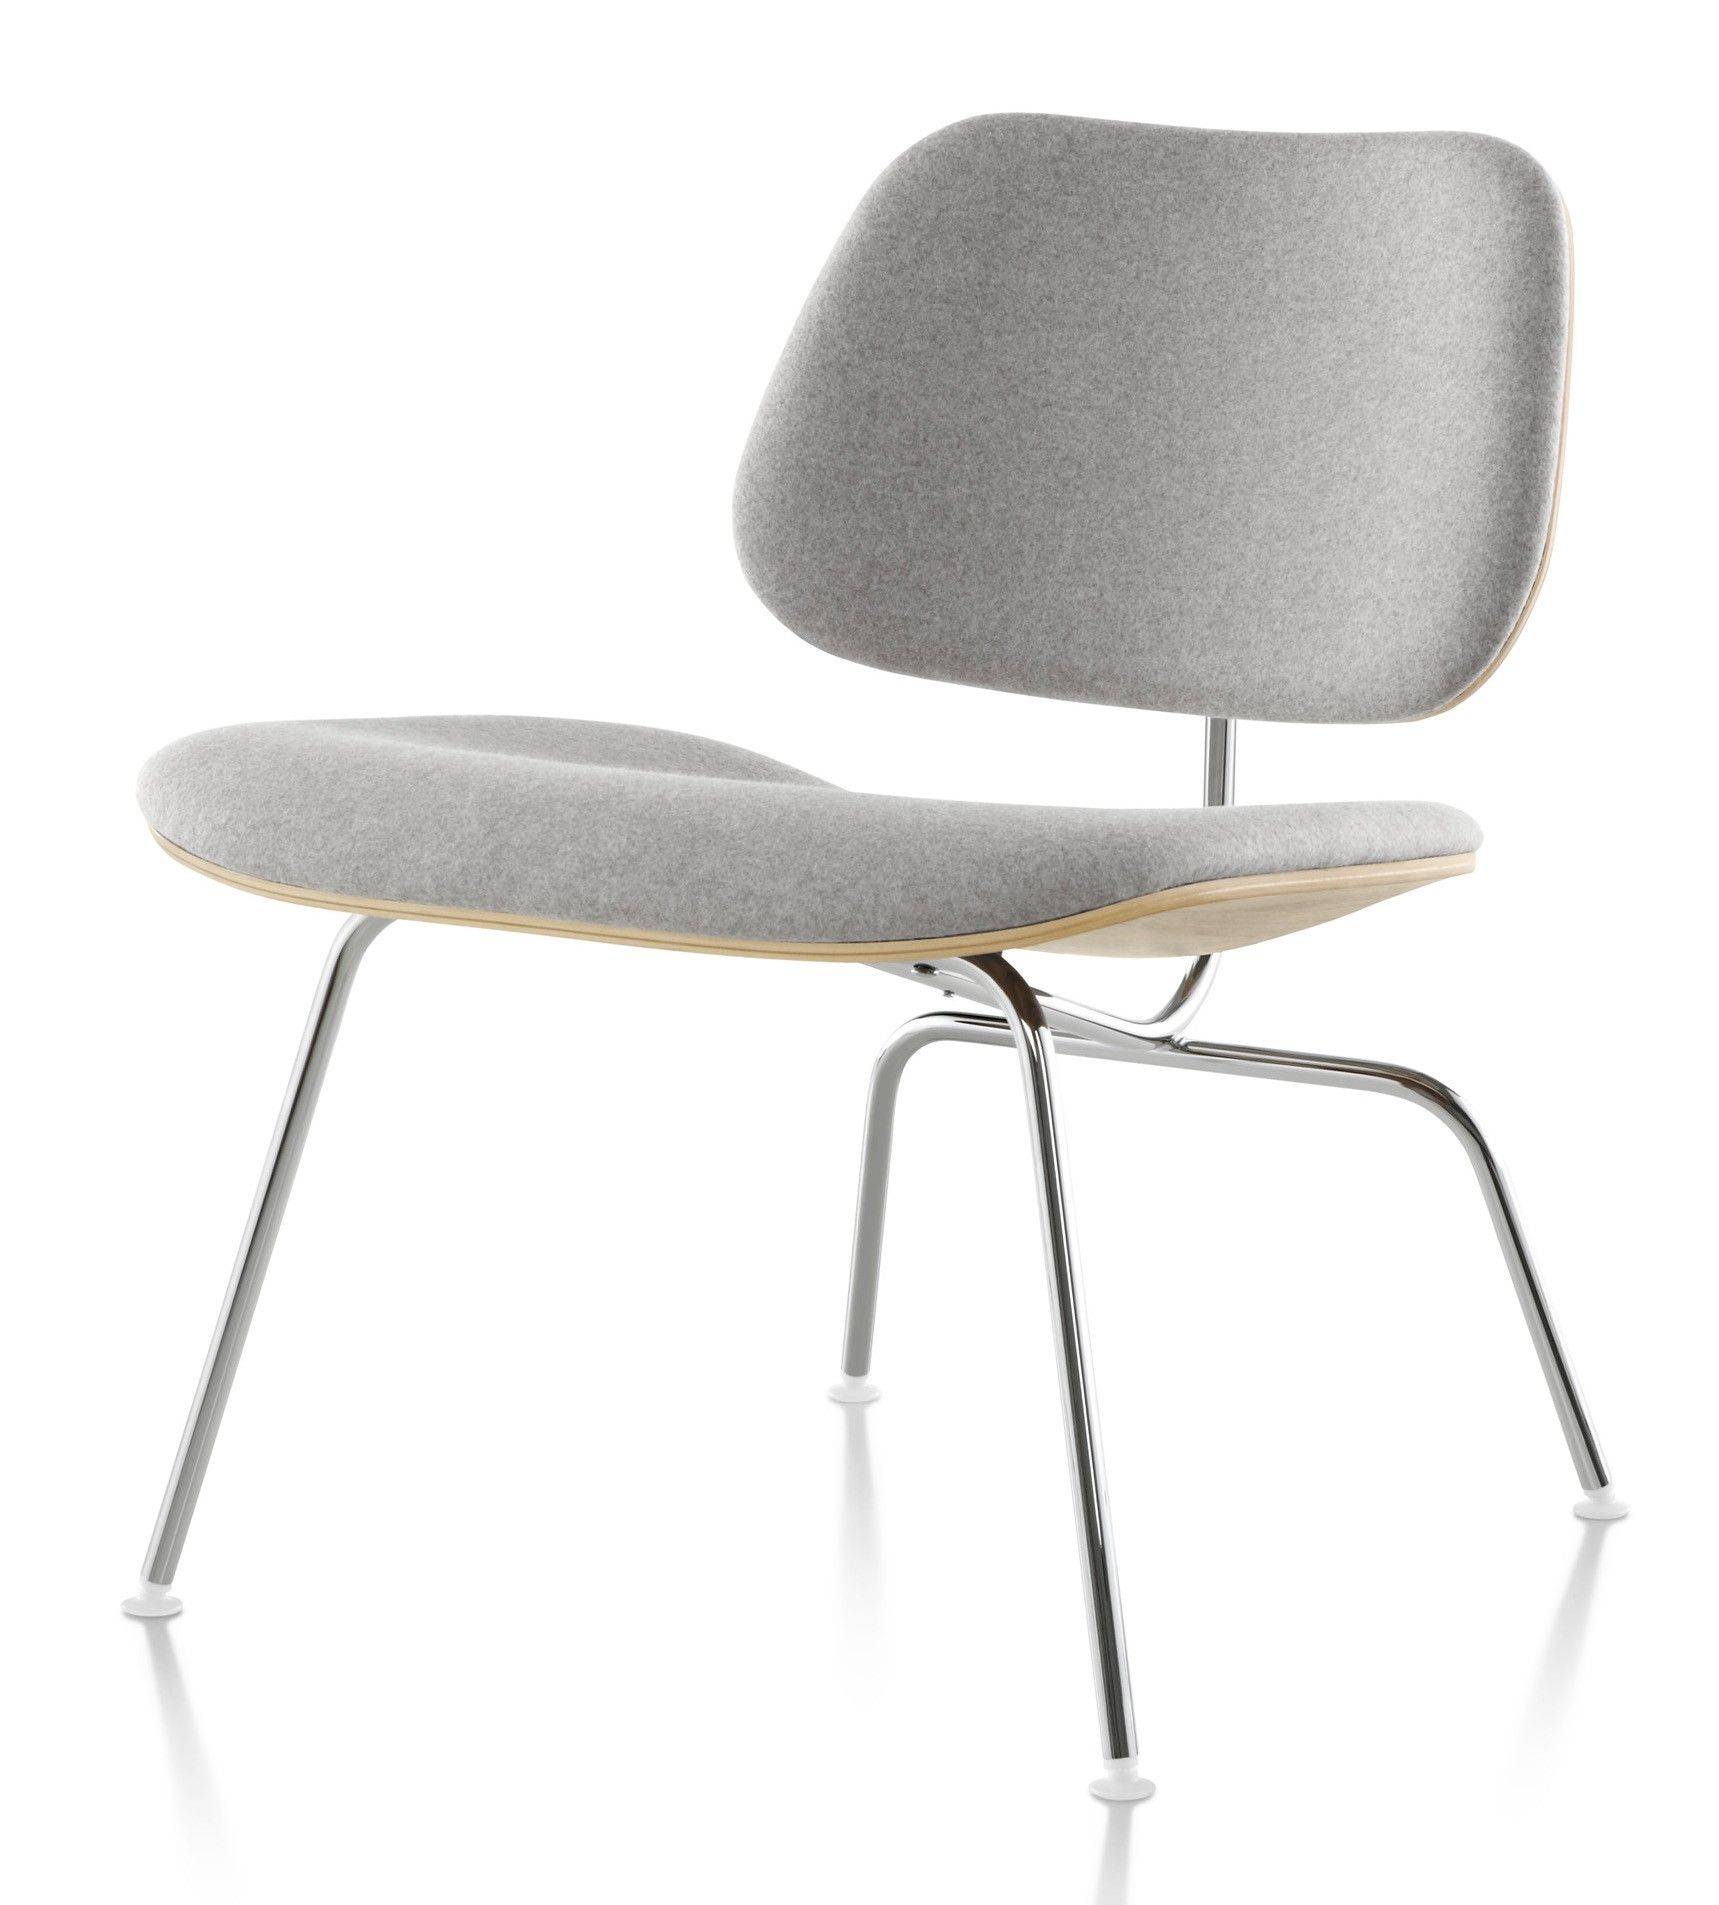 Herman Miller Eames® Molded Plywood Upholstered Lounge Chair – Metal Legs With Lounge Chairs With Metal Leg (View 7 of 15)